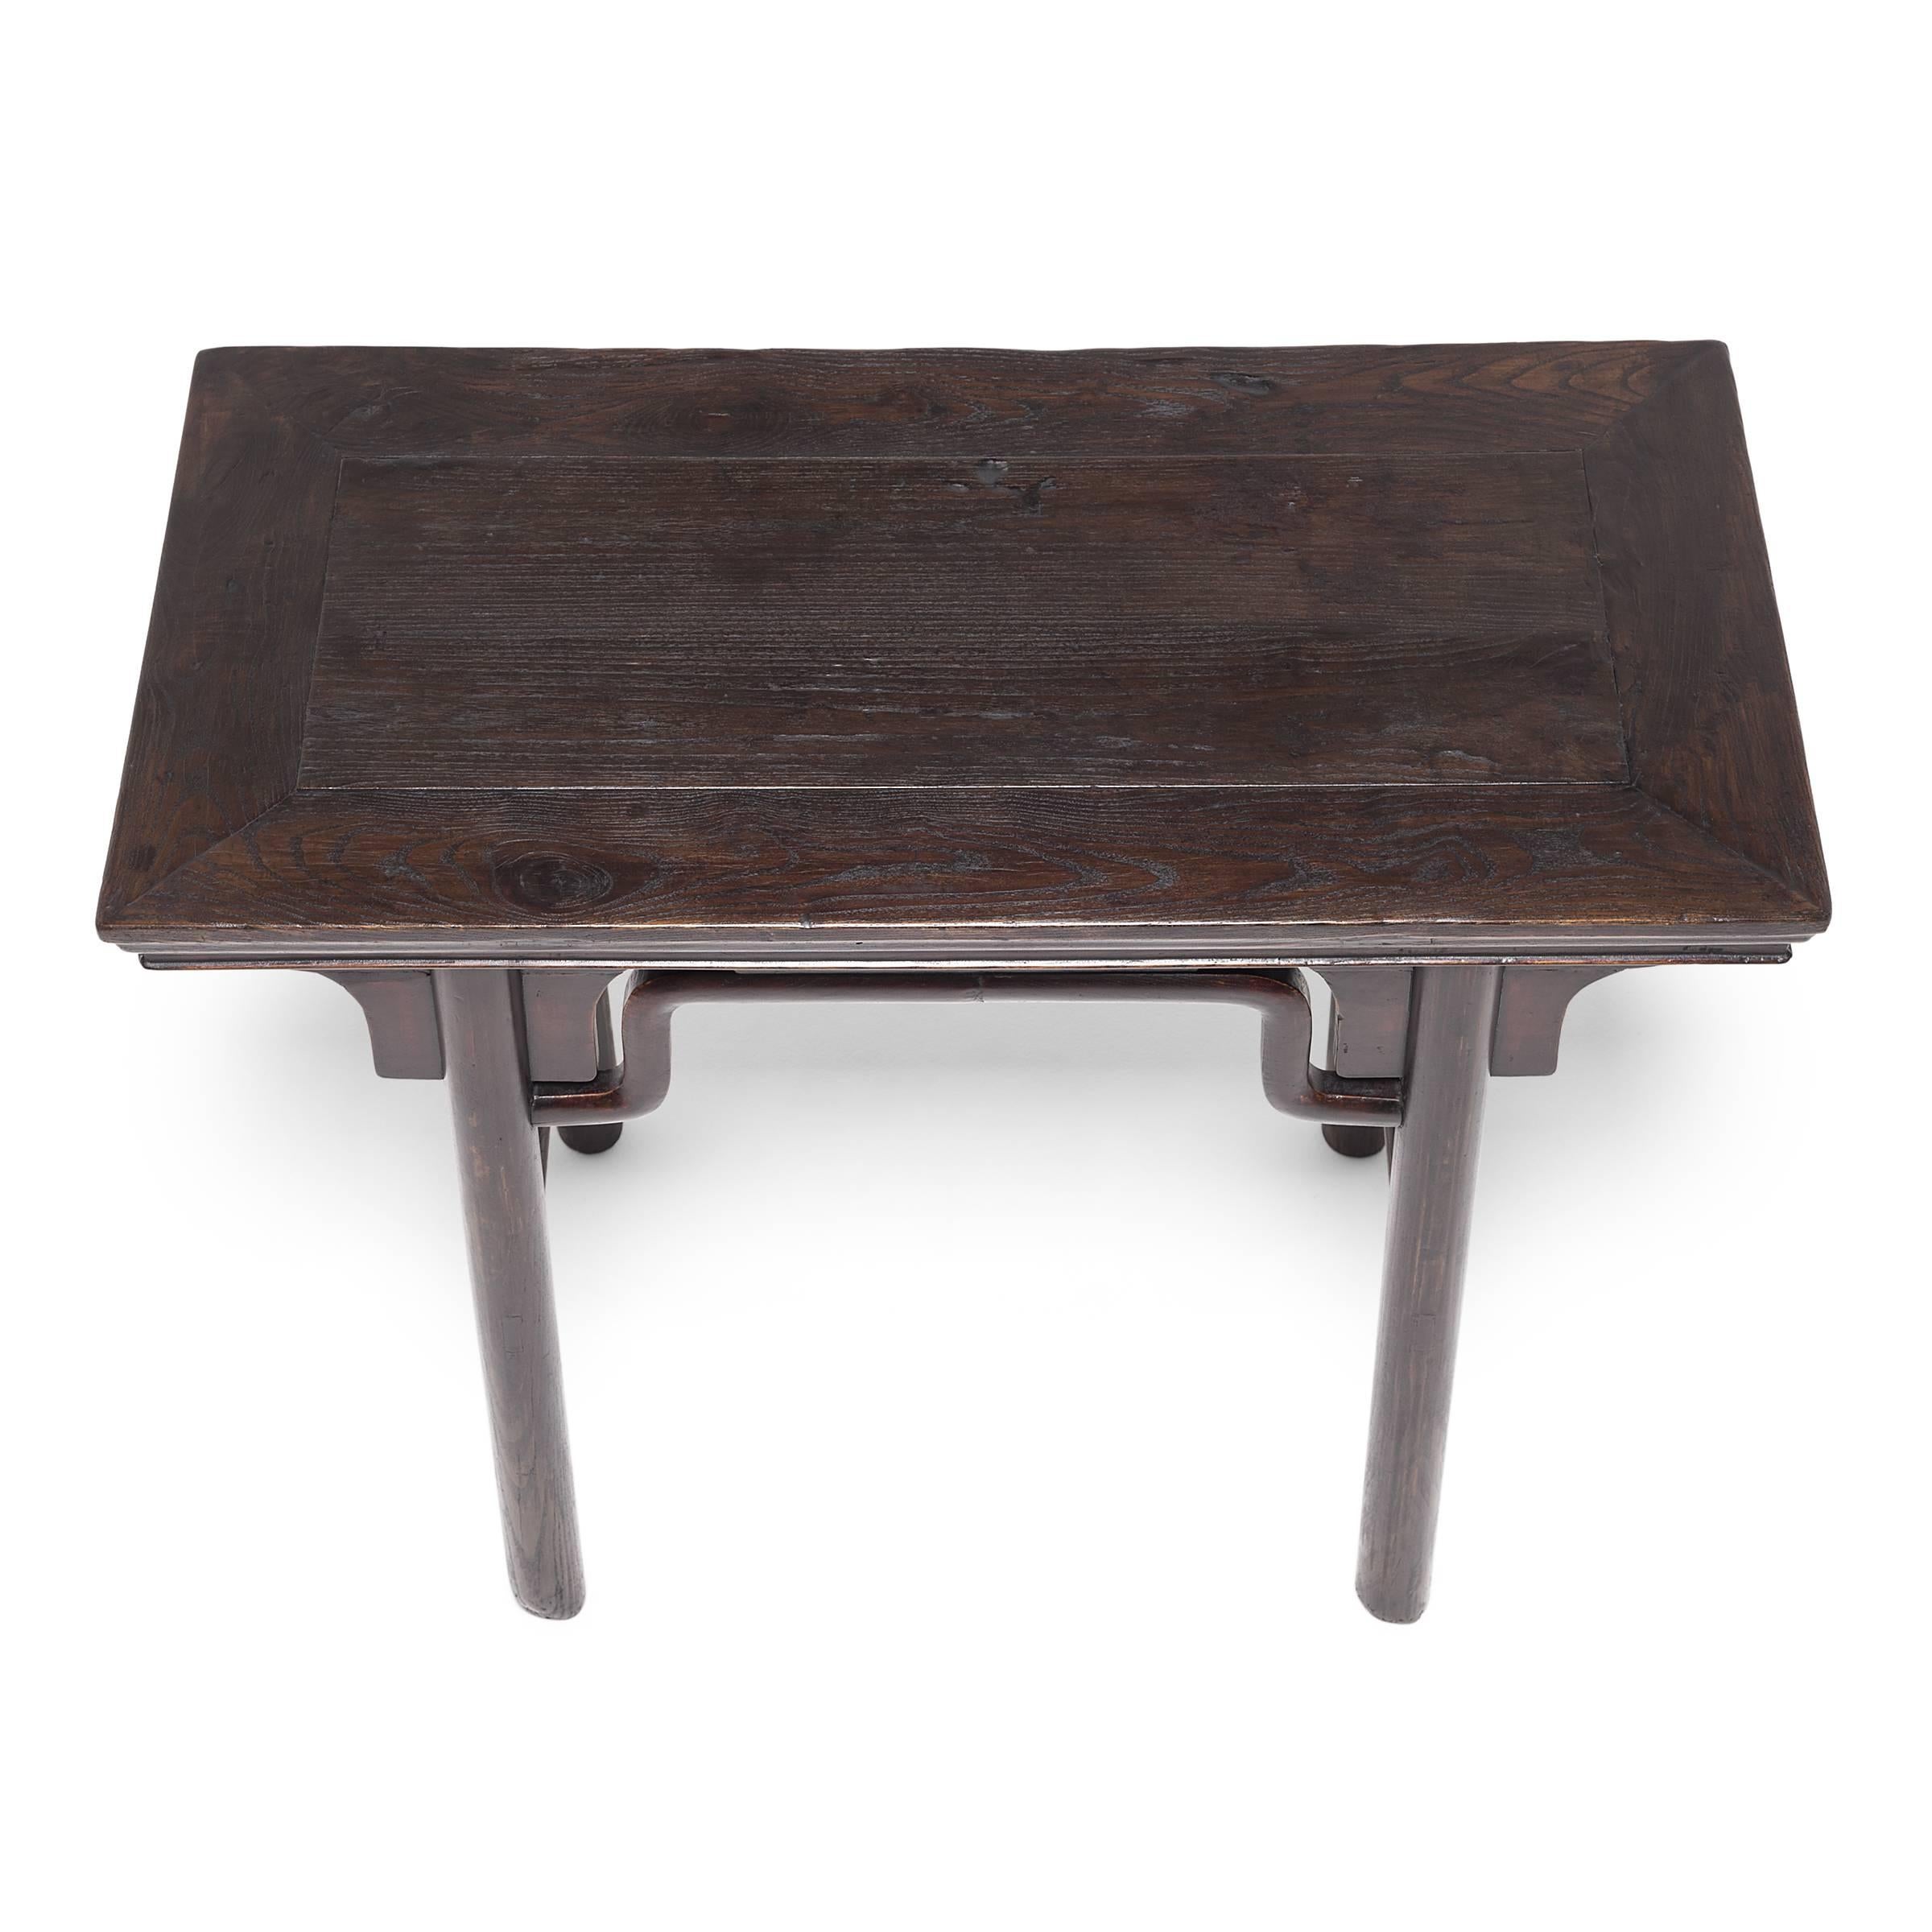 19th Century Chinese Petite Round Leg Wine Table, circa 1850 For Sale